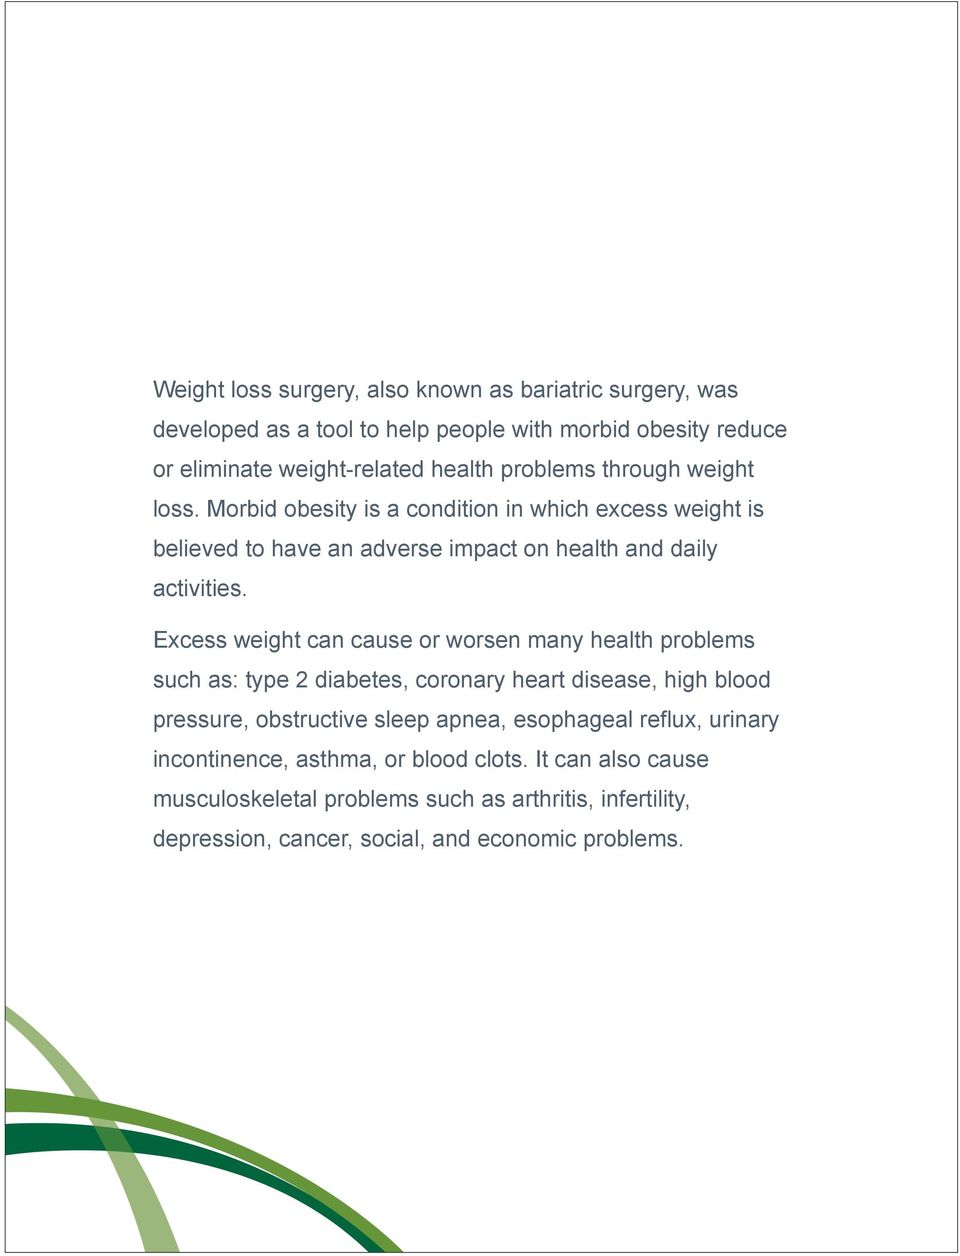 Excess weight can cause or worsen many health problems such as: type 2 diabetes, coronary heart disease, high blood pressure, obstructive sleep apnea, esophageal